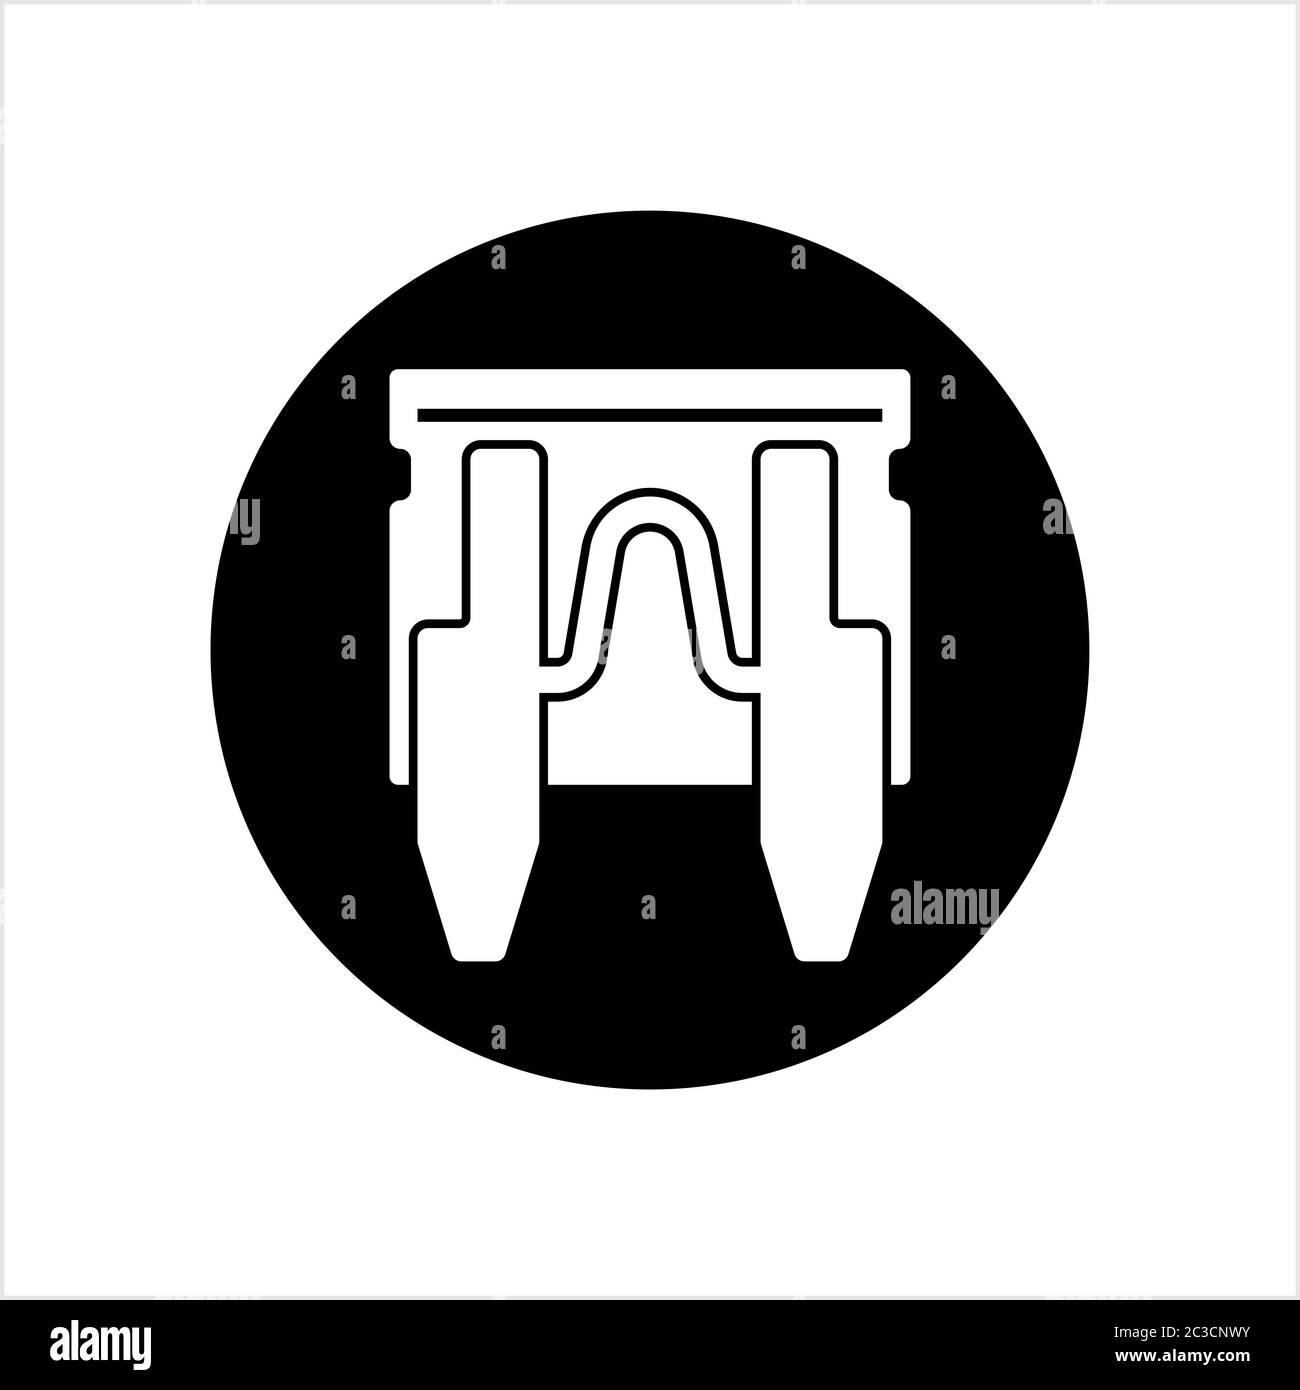 Fuse Icon, Melting Breaking Protective Fuse Vector Art Illustration Stock Vector